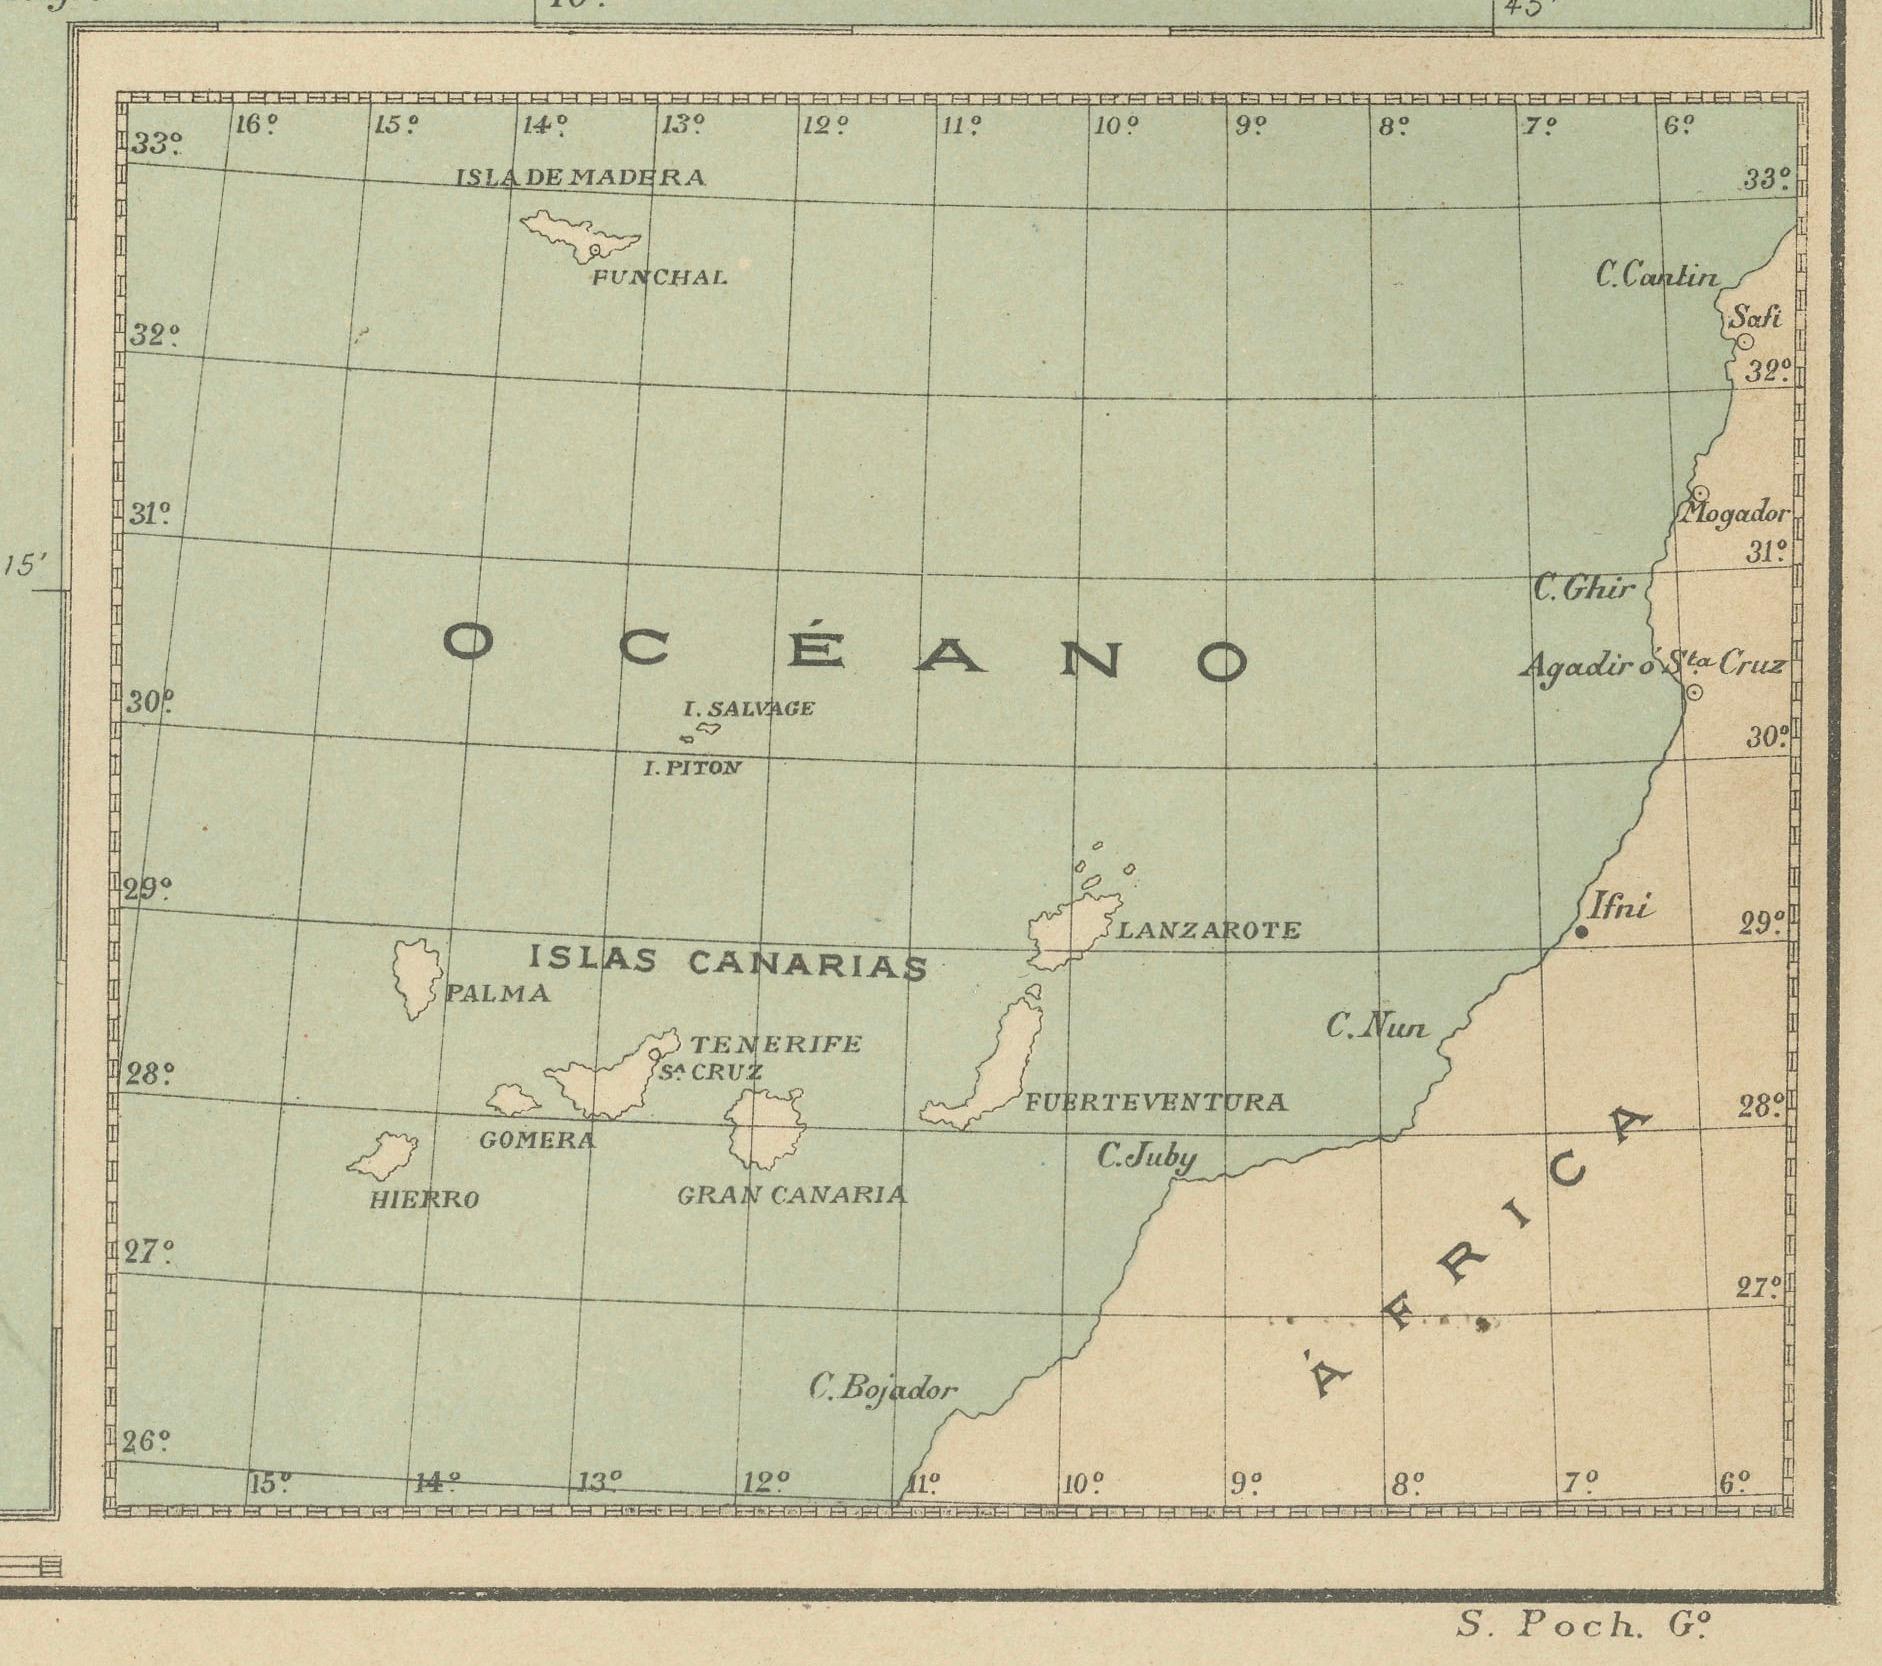 The map is the second sheet (2ª HOJA) of a historical map series of the Canary Islands from 1902. It depicts three of the major islands: Gran Canaria, Fuerteventura, and Lanzarote, along with smaller islets like La Graciosa near Lanzarote.

The map